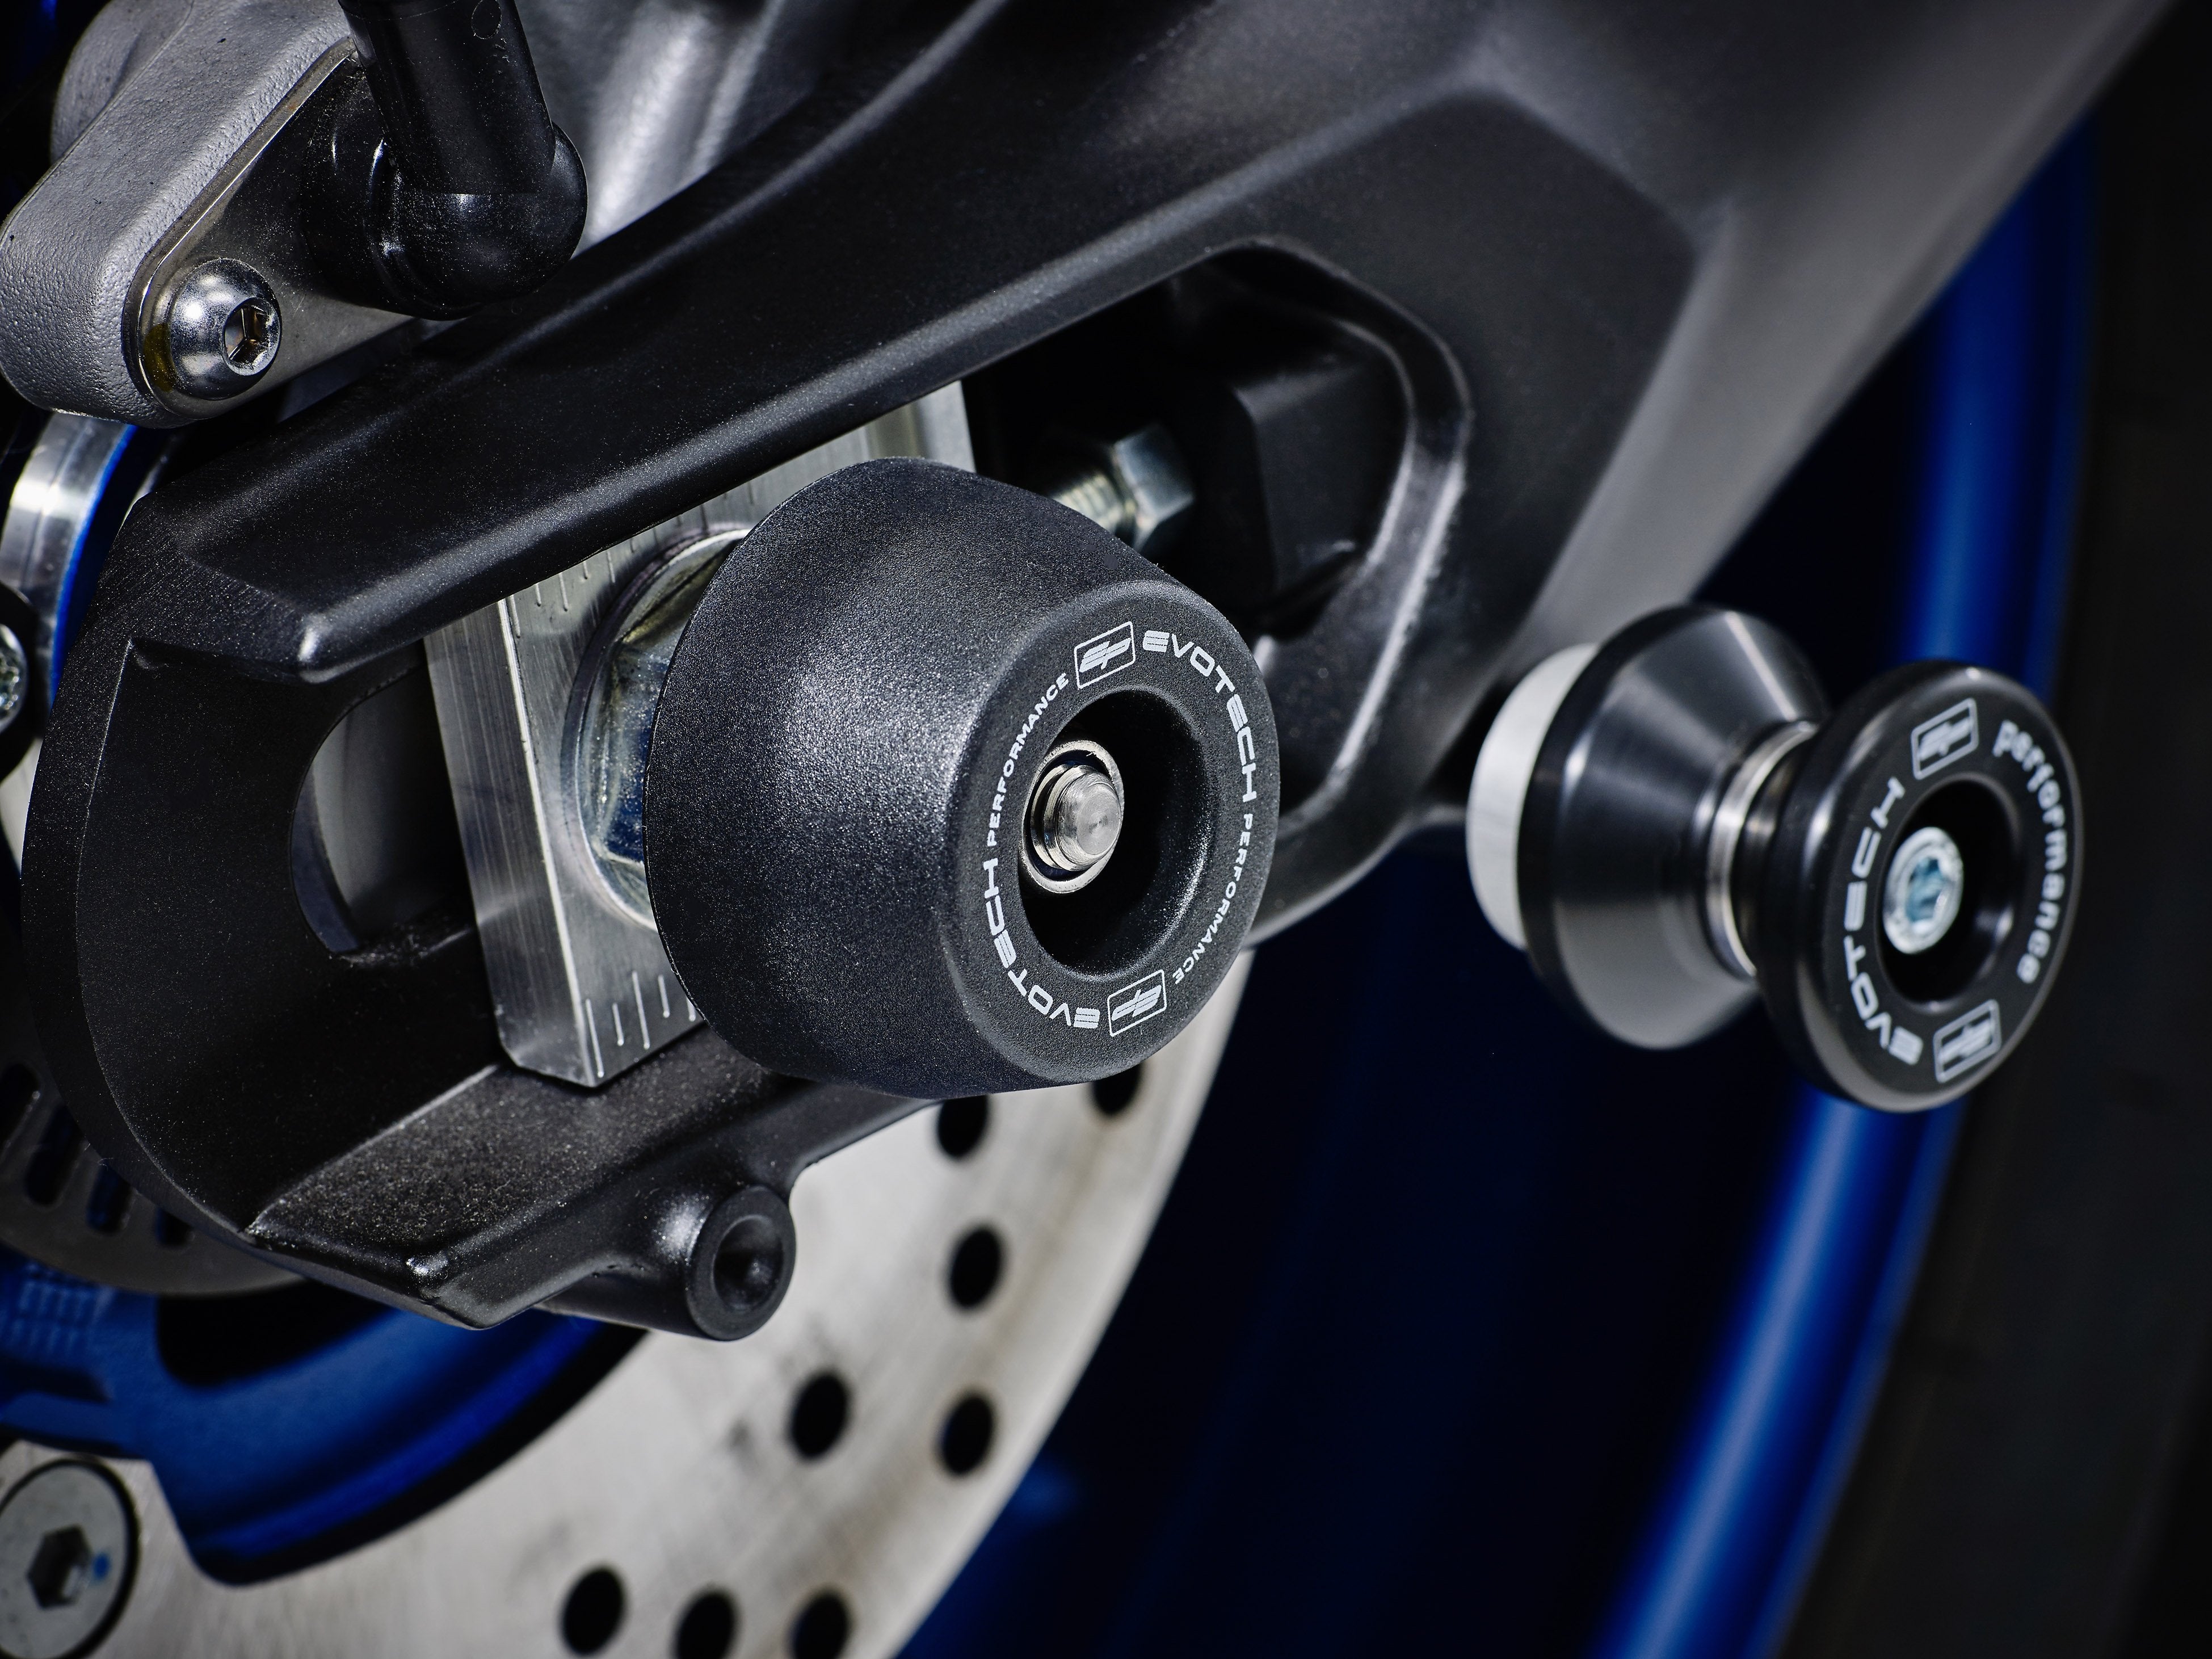 The rear wheel of the Yamaha MT-09 with EP Spindle Bobbins Crash Protection bobbin fitted to the rear spindle offering swingarm protection. 